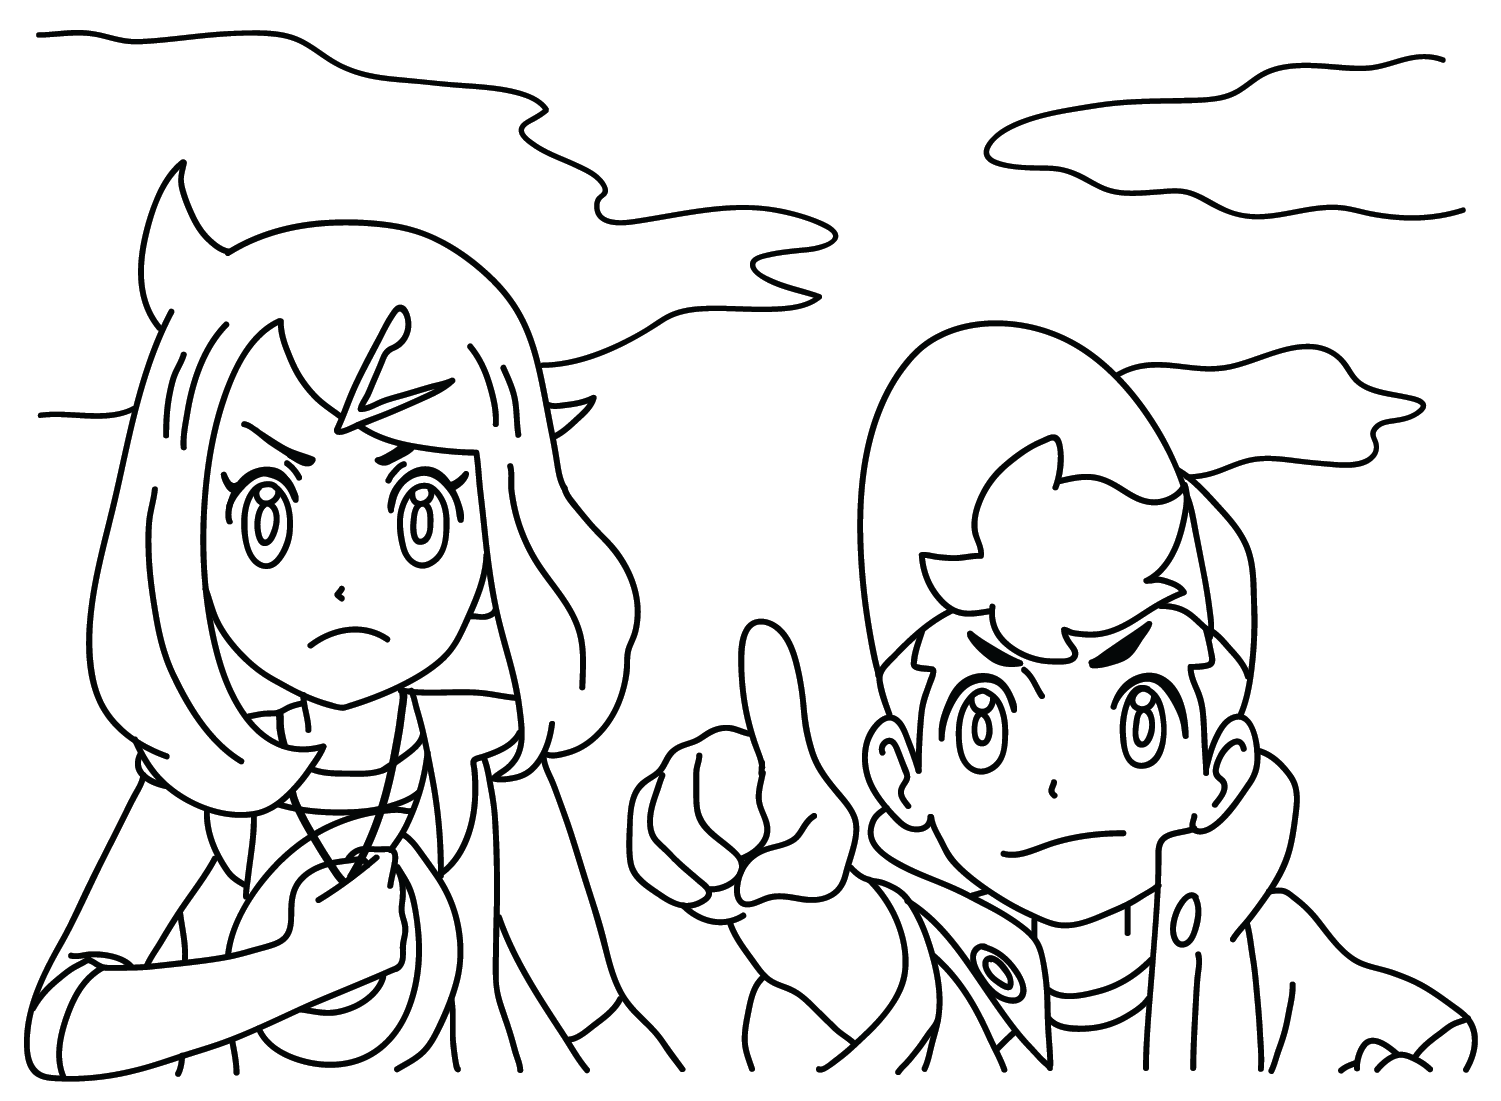 Roy and Liko of Pokemon Images to Color from Liko Pokemon